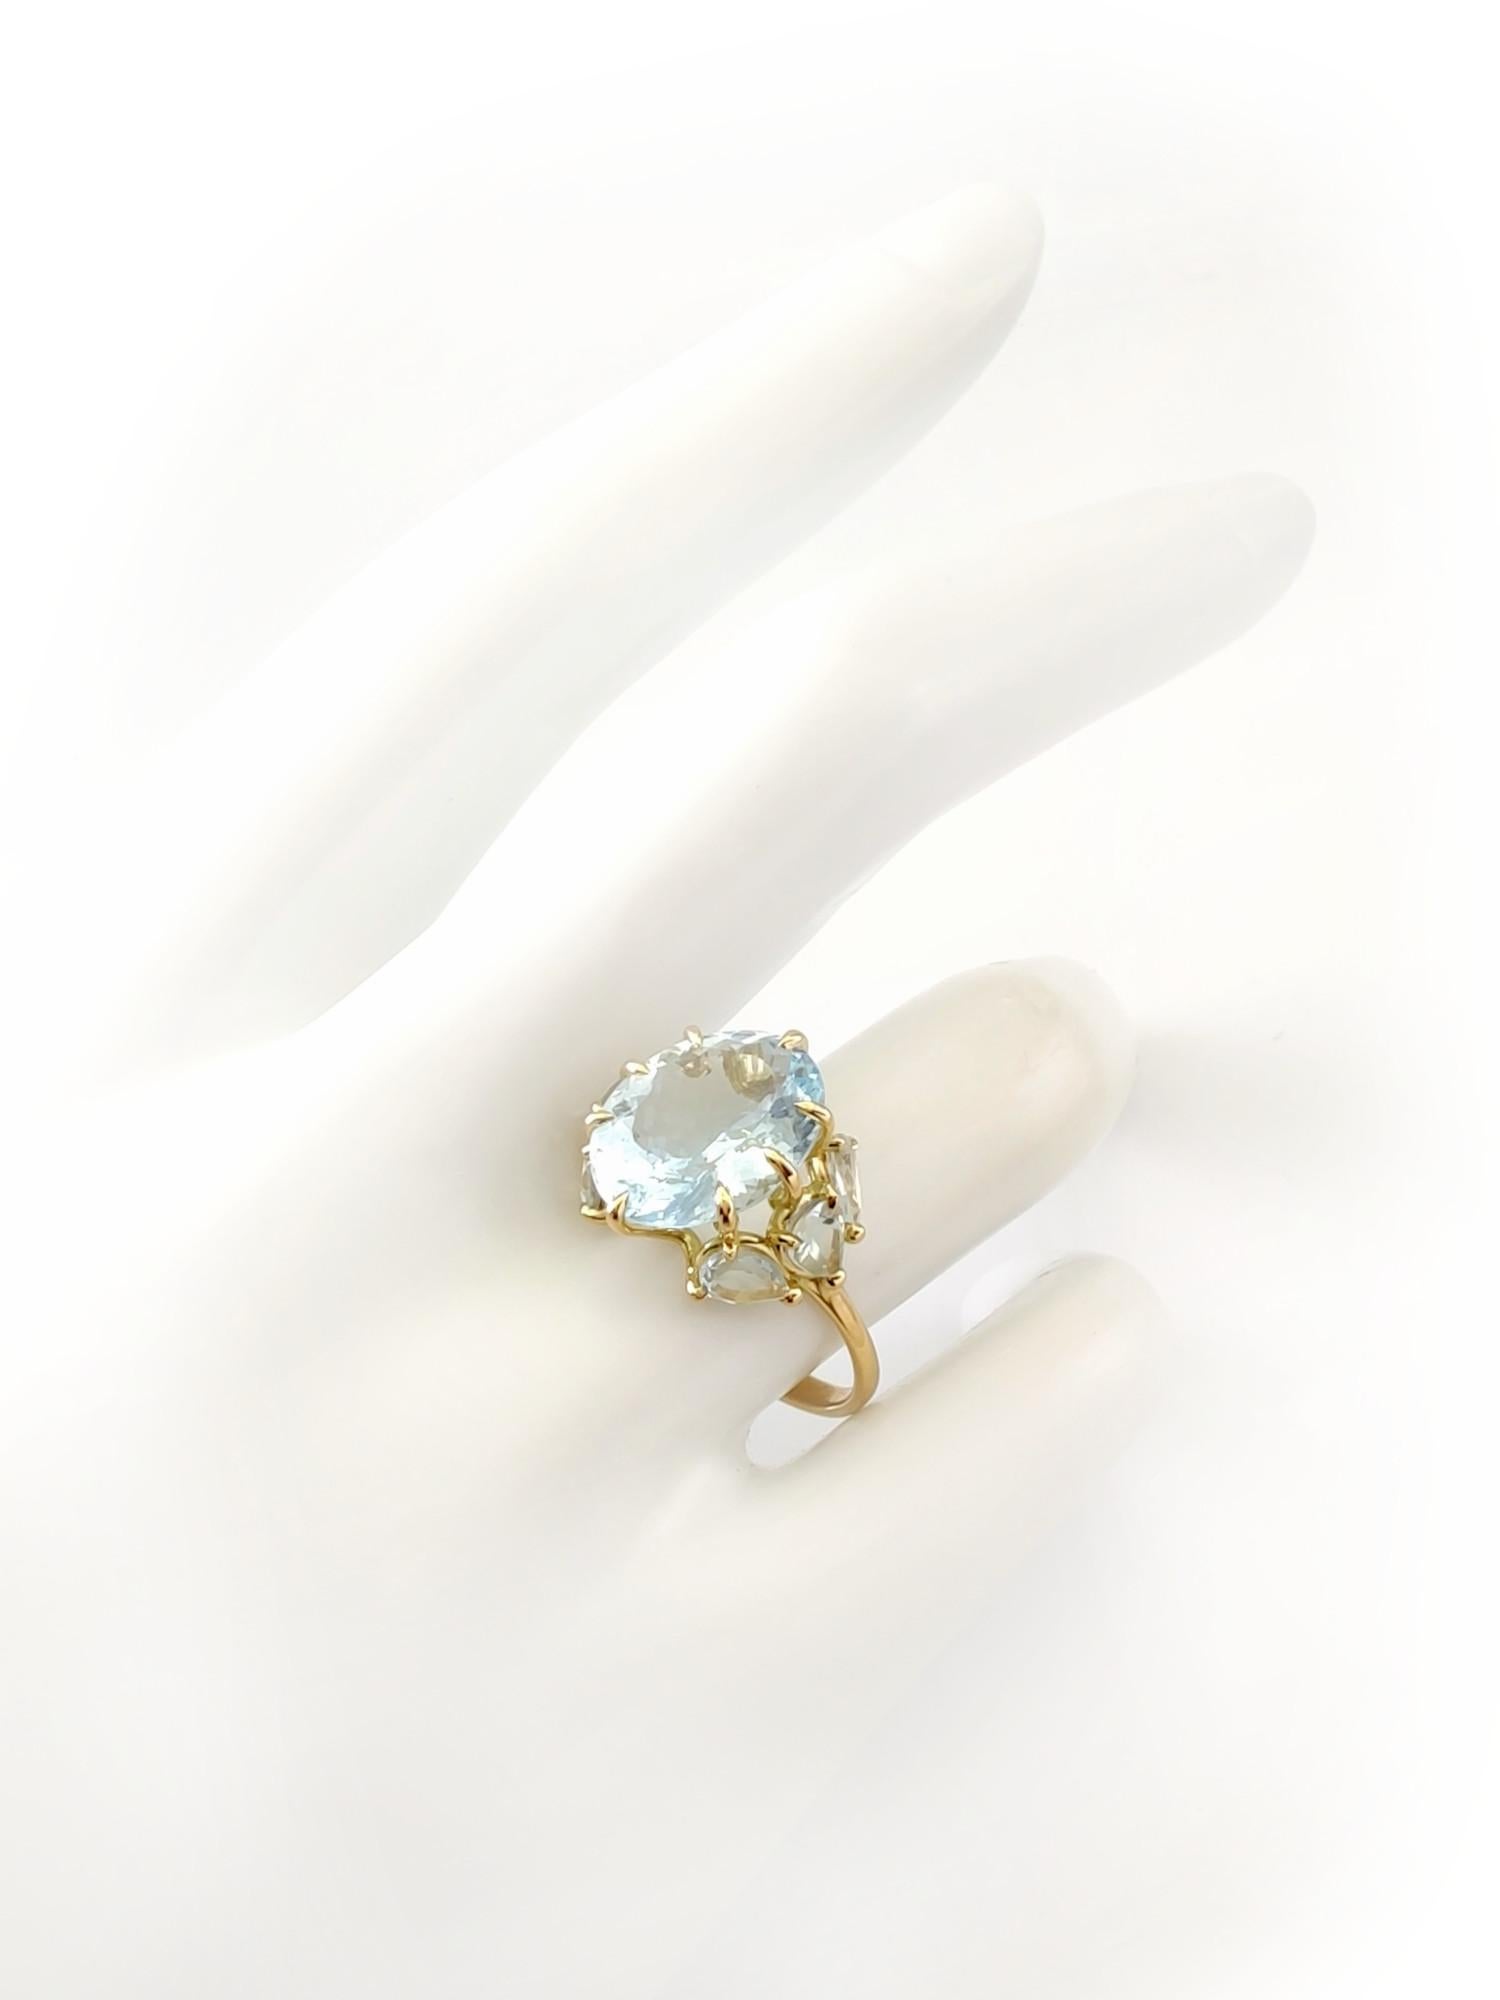 Handmade 4.8 Carat Oval Aquamarine Cocktail Ring in 18K Yellow Gold For Sale 4